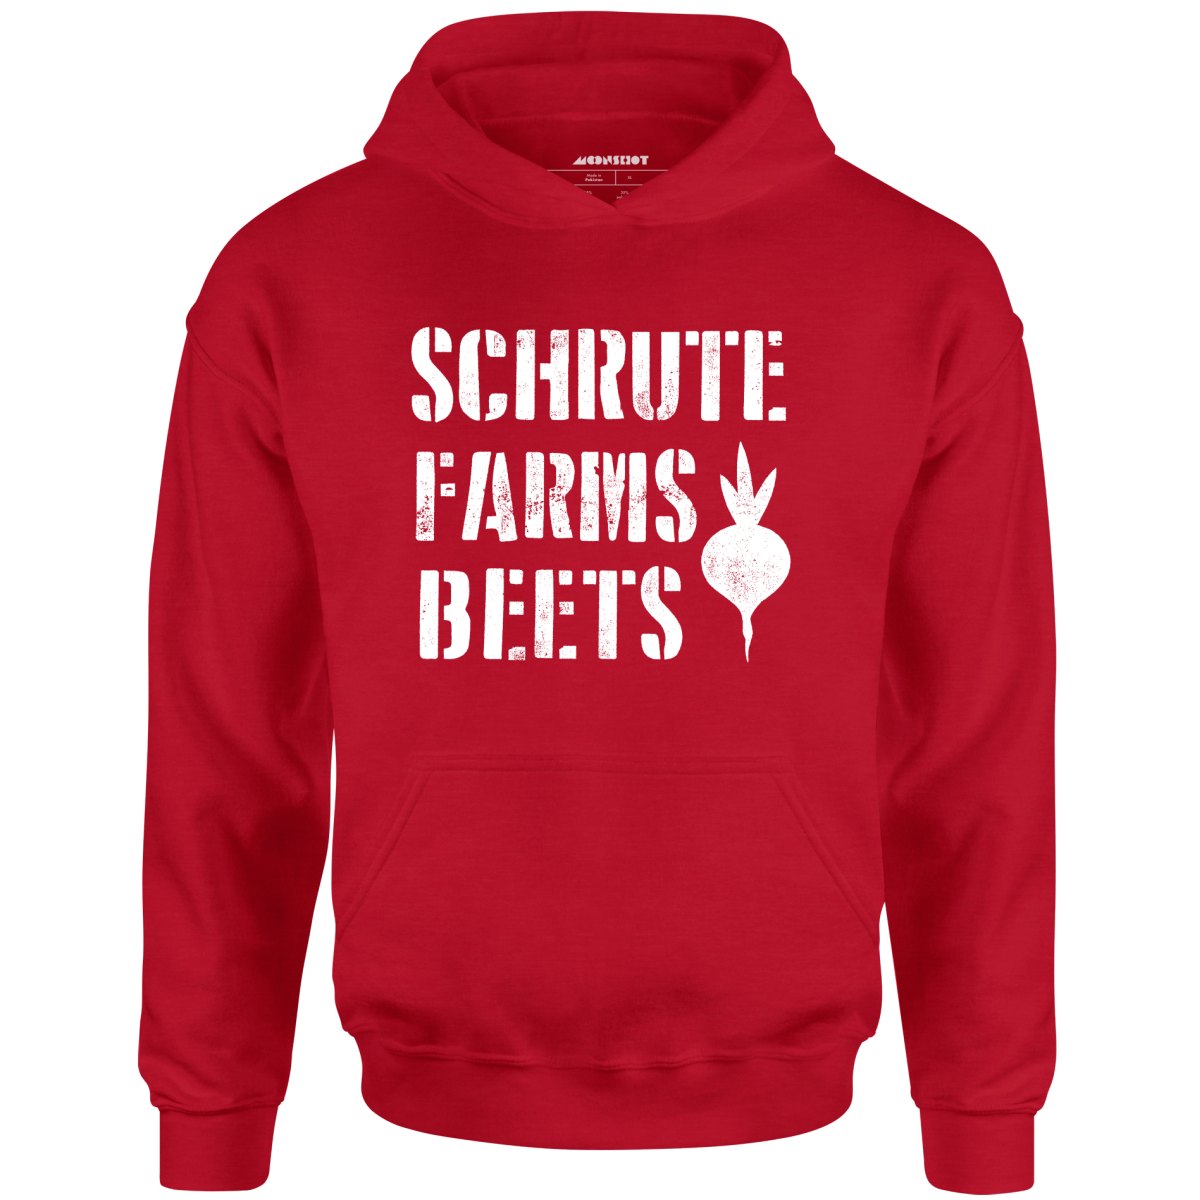 Schrute Farms Beets - Unisex Hoodie